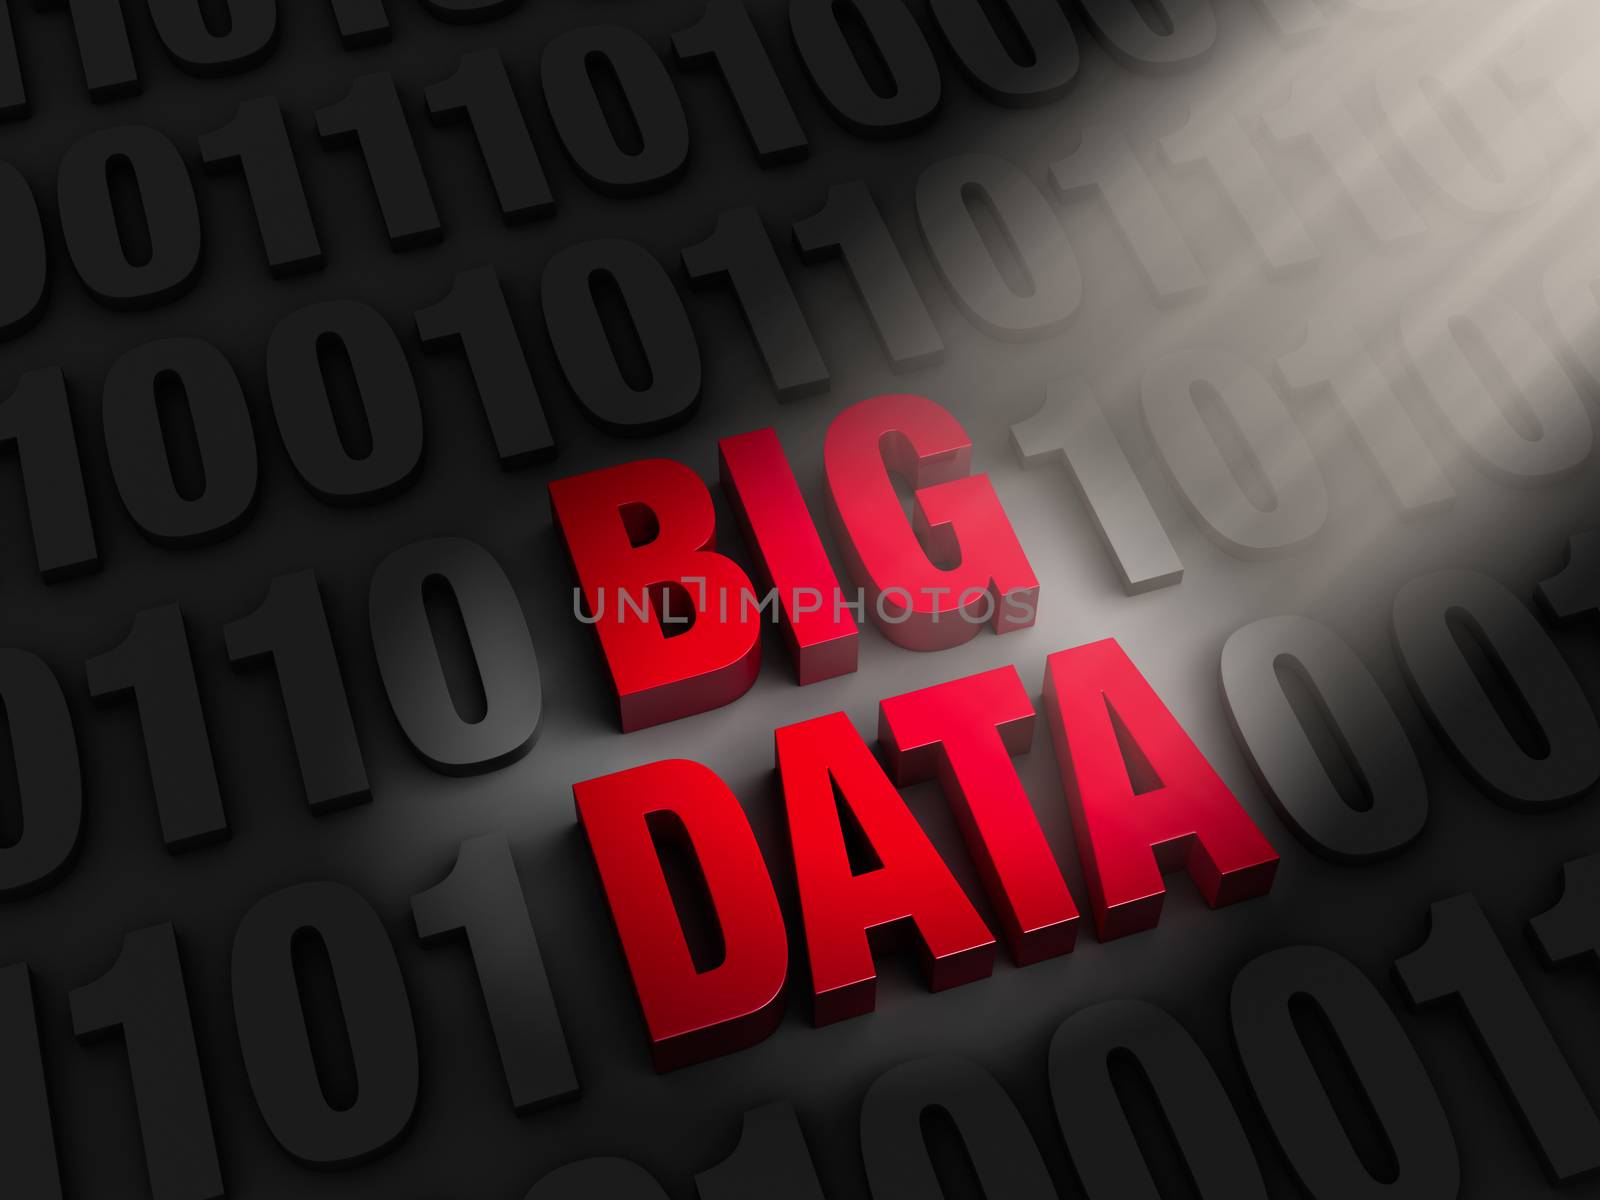 Finding Big Data by Em3